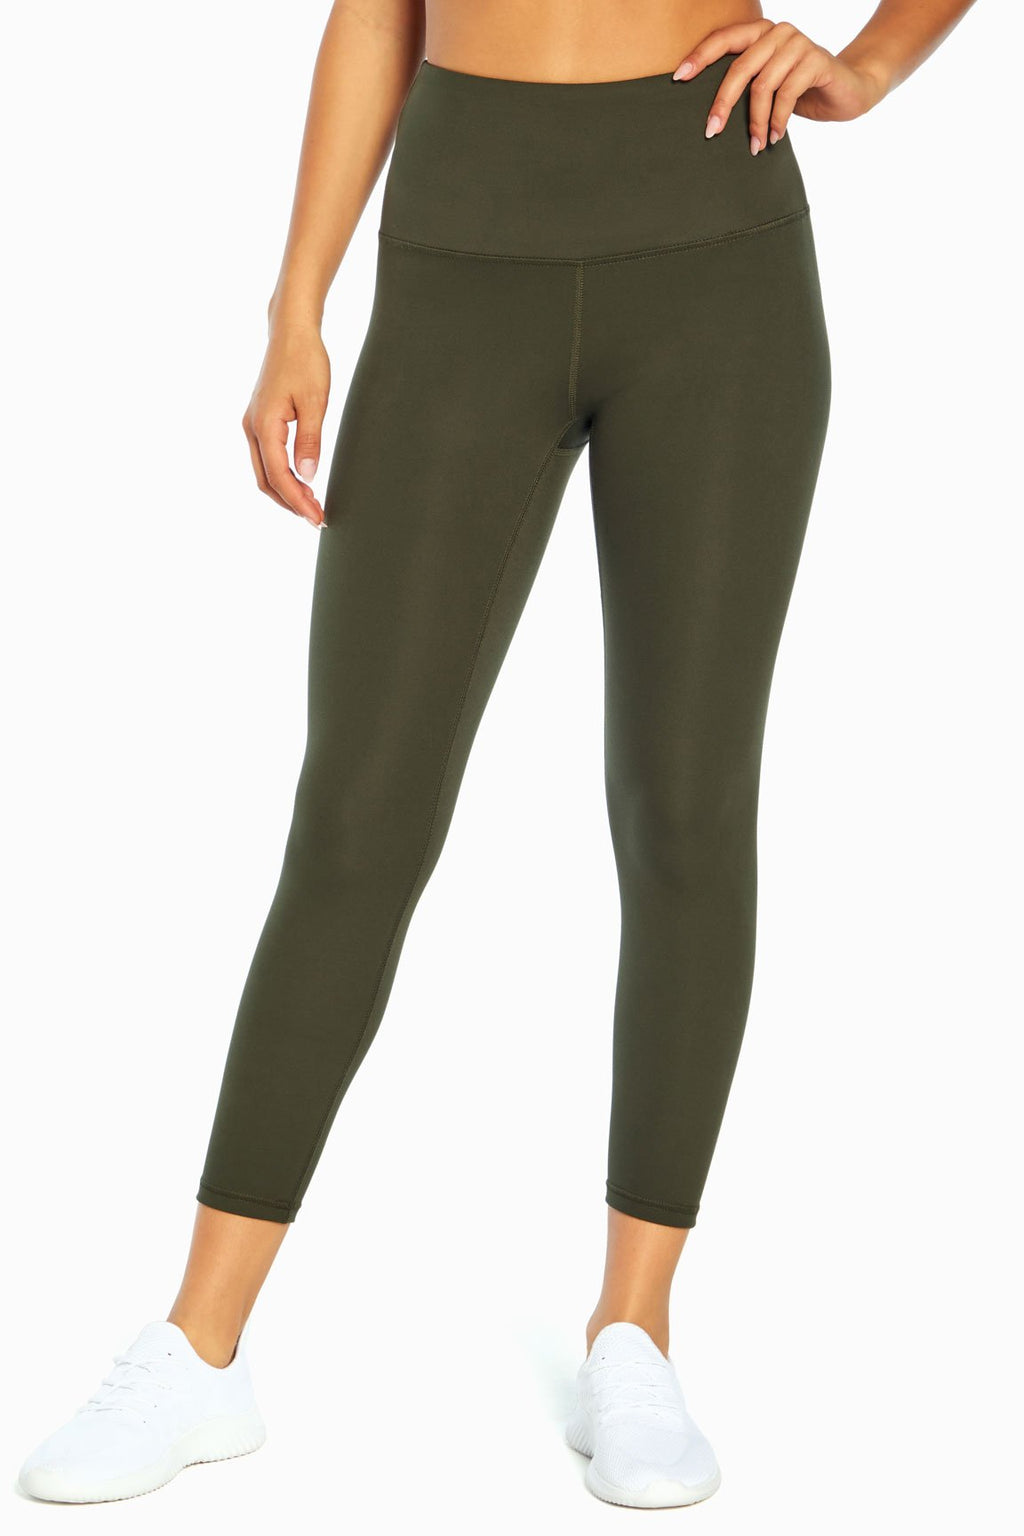 Zobha Ultra High Rise Crop Leggings Nwt Small Green Black Print Athletics -  $20 New With Tags - From Carolyn